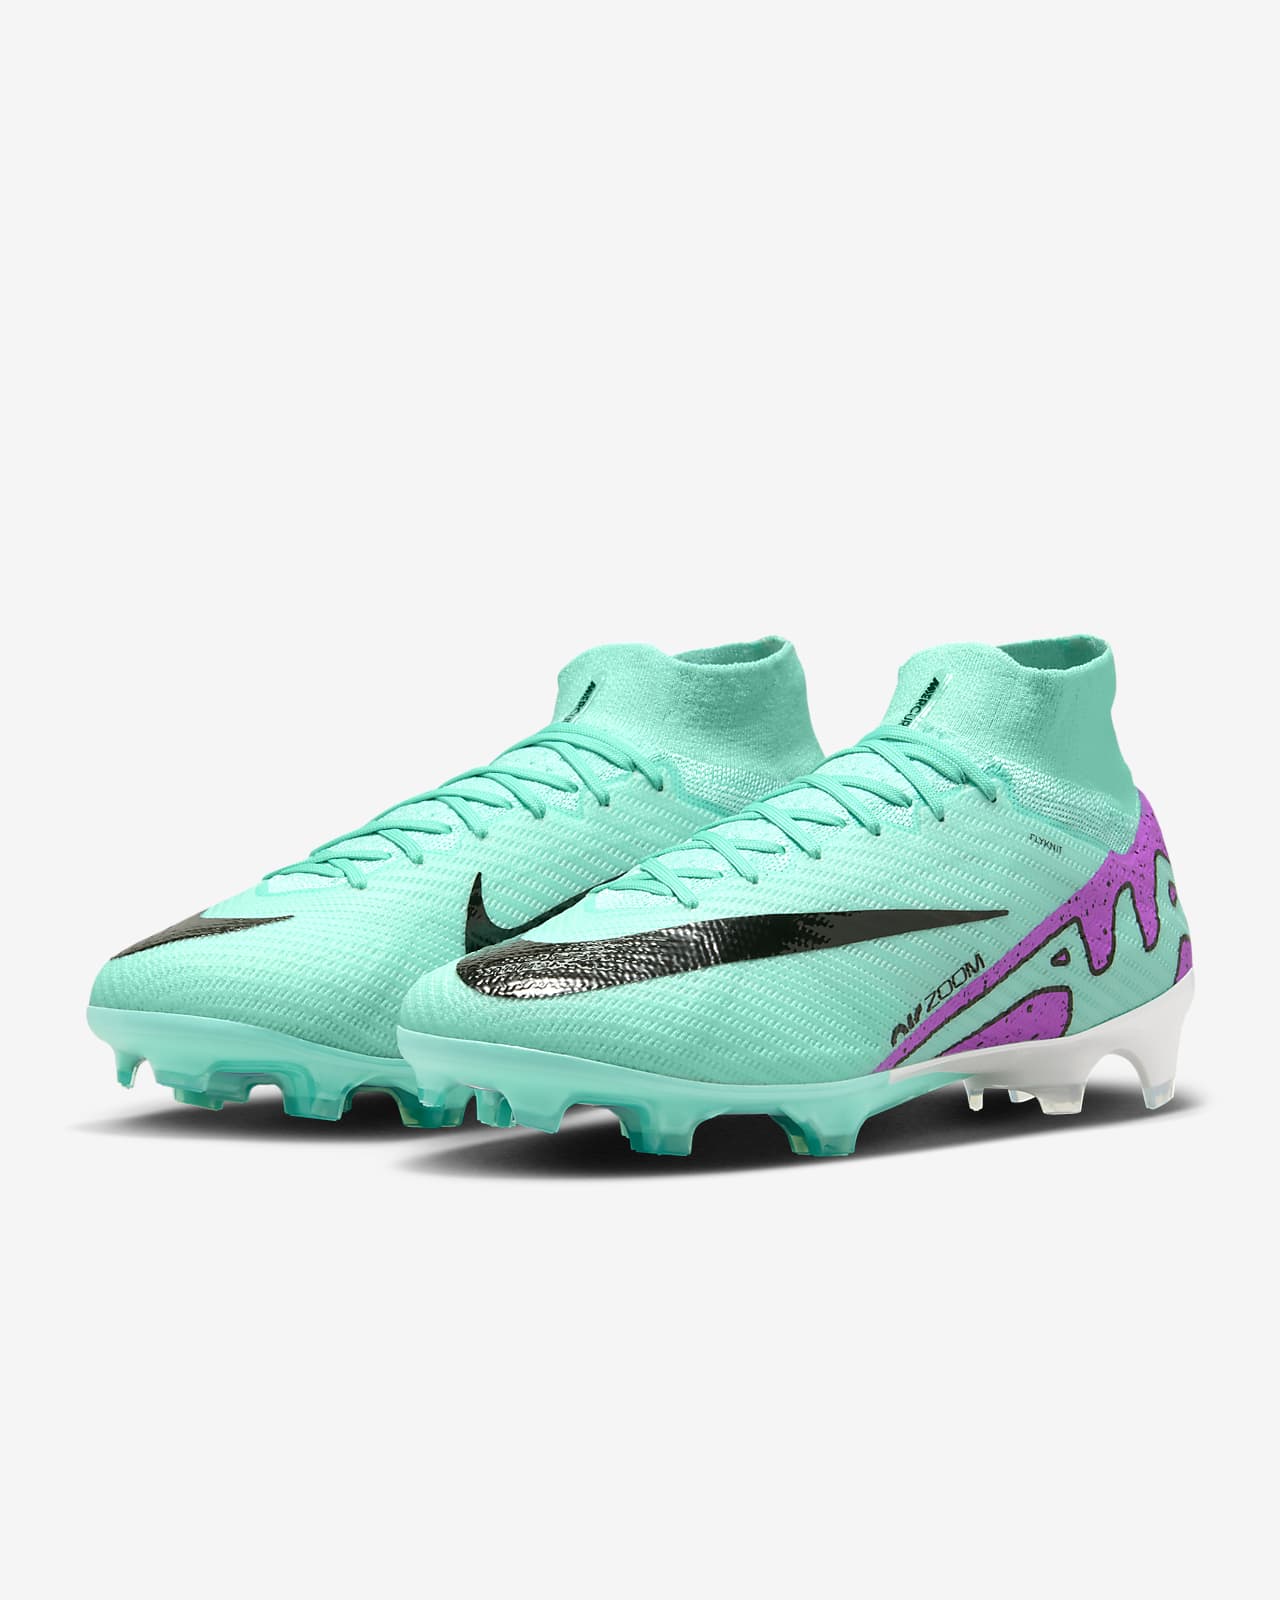 Nike World Cup Generations Pack - Soccer Cleats 101